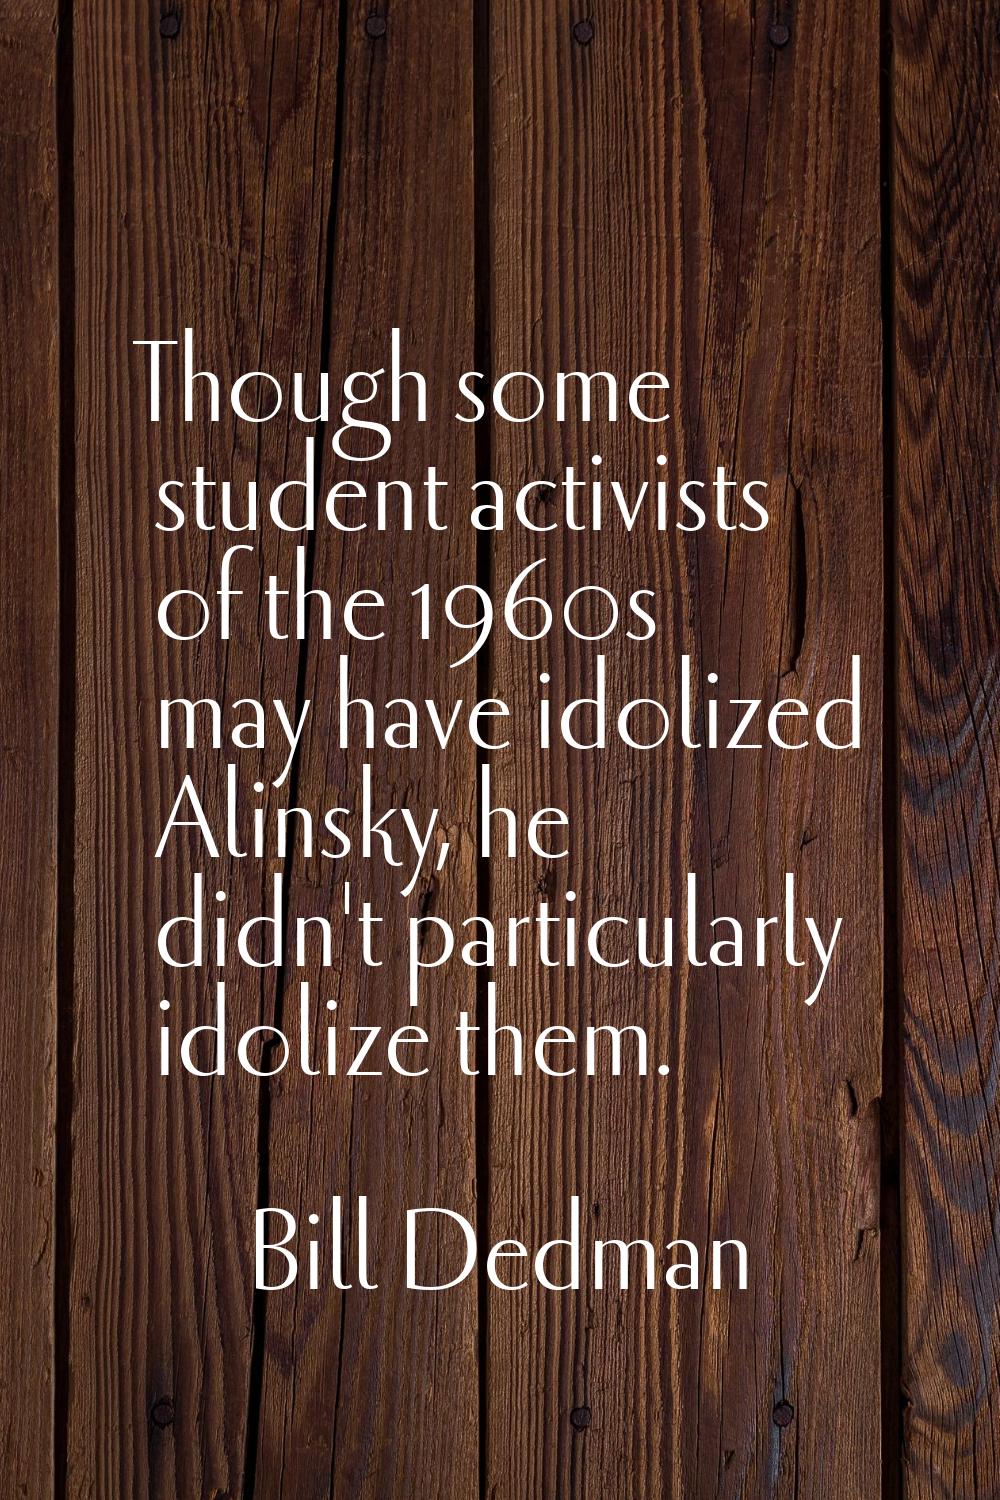 Though some student activists of the 1960s may have idolized Alinsky, he didn't particularly idoliz